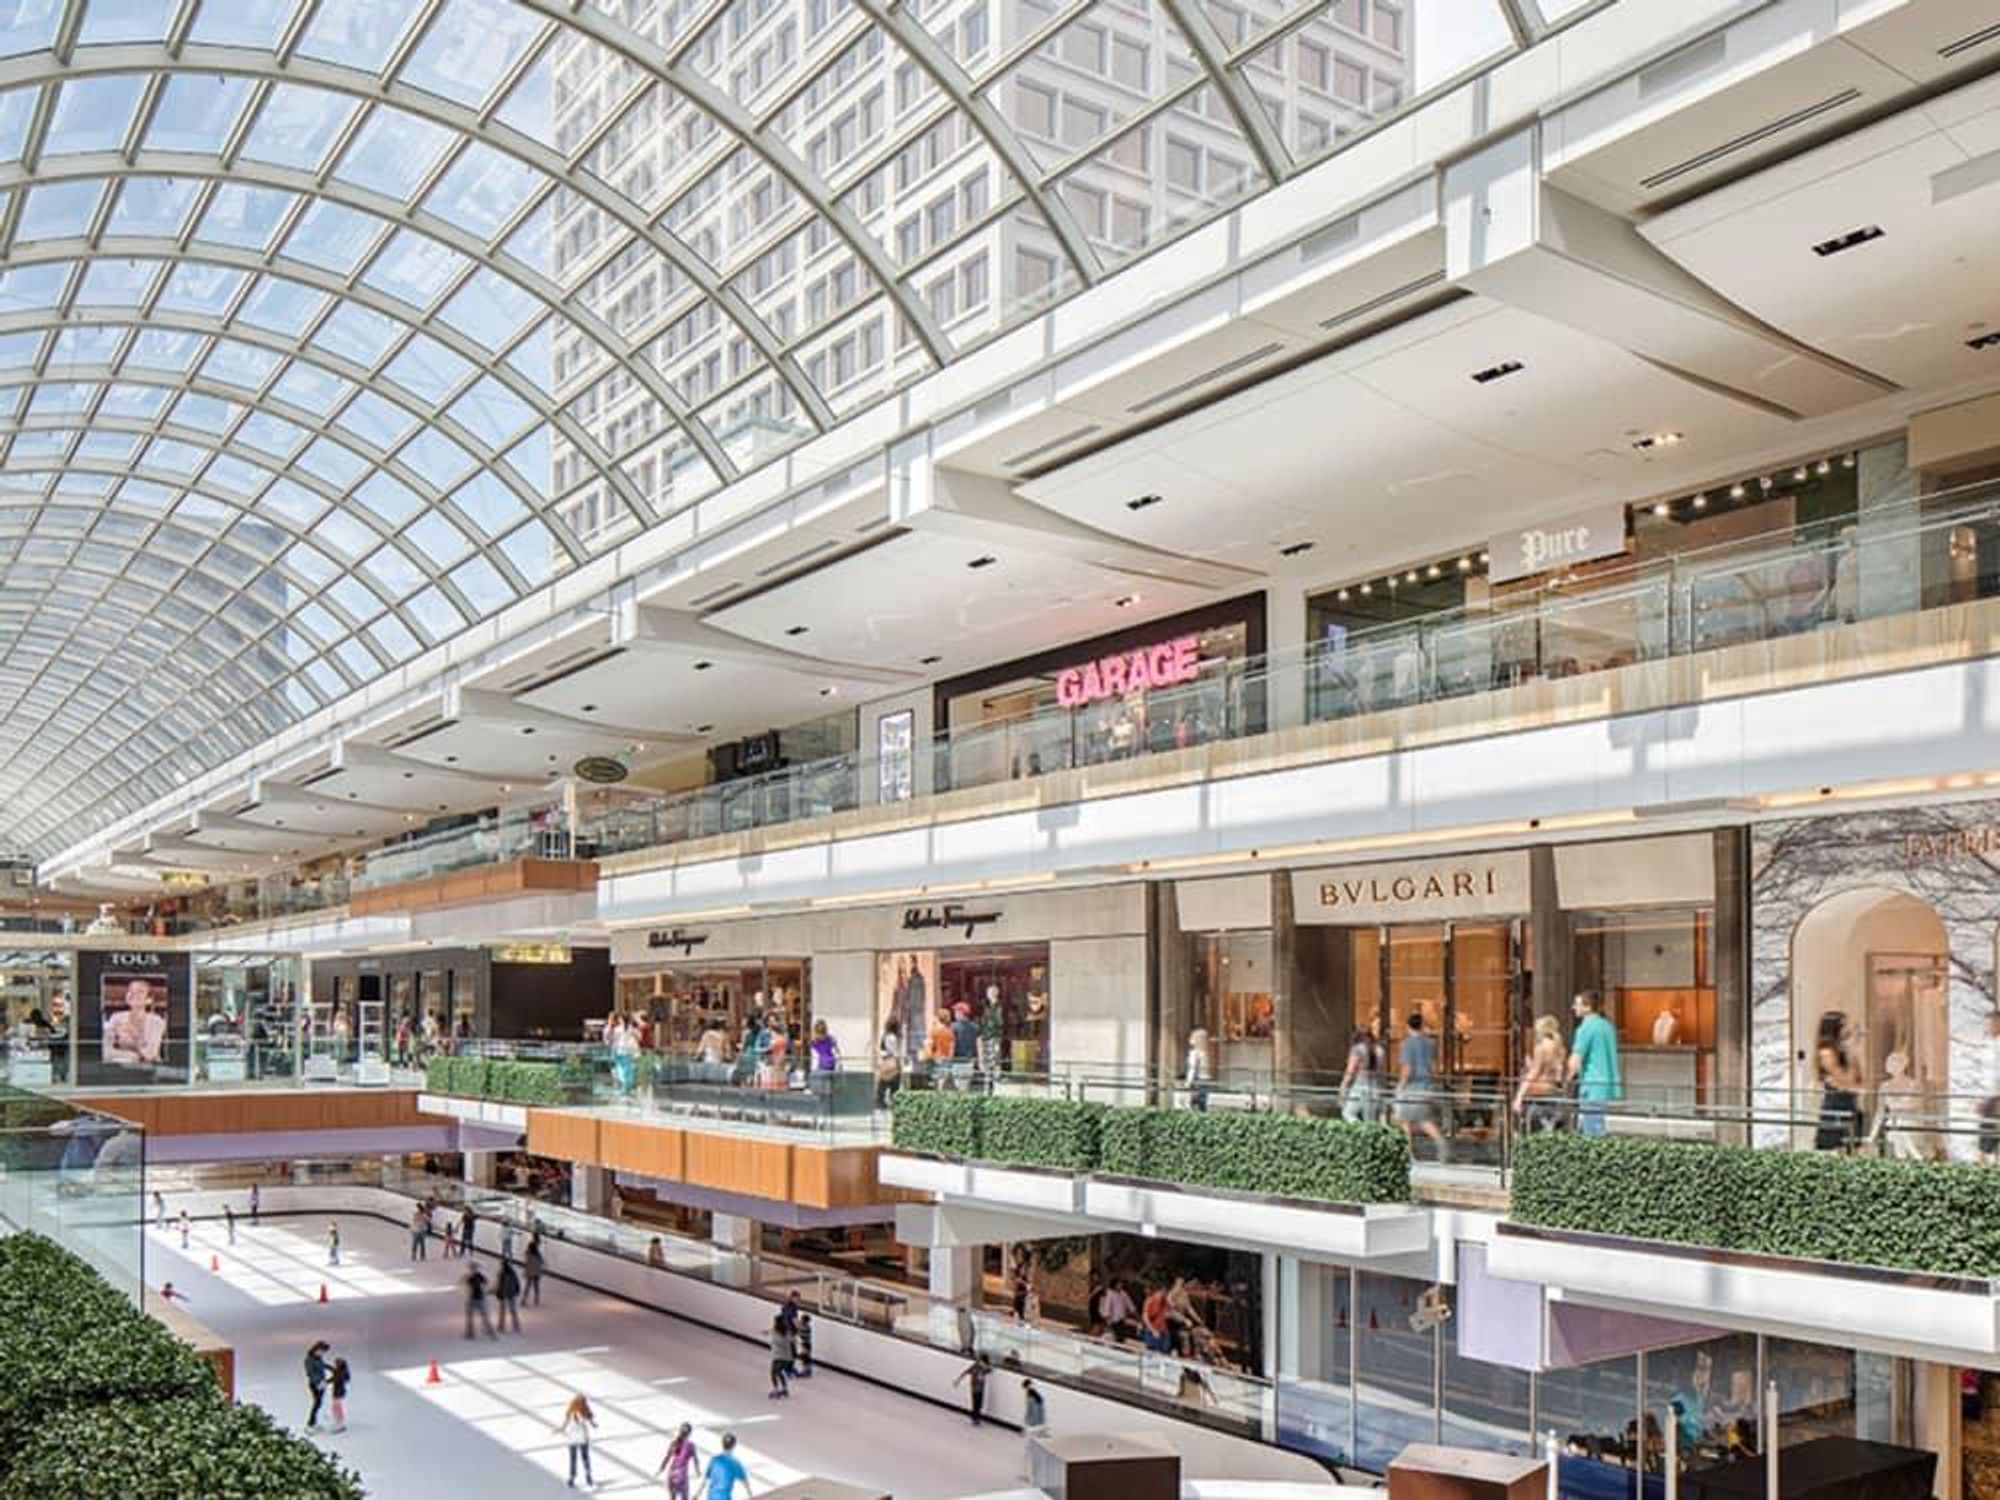 Select retailers at Galleria Dallas will open for retail-to-go on Friday